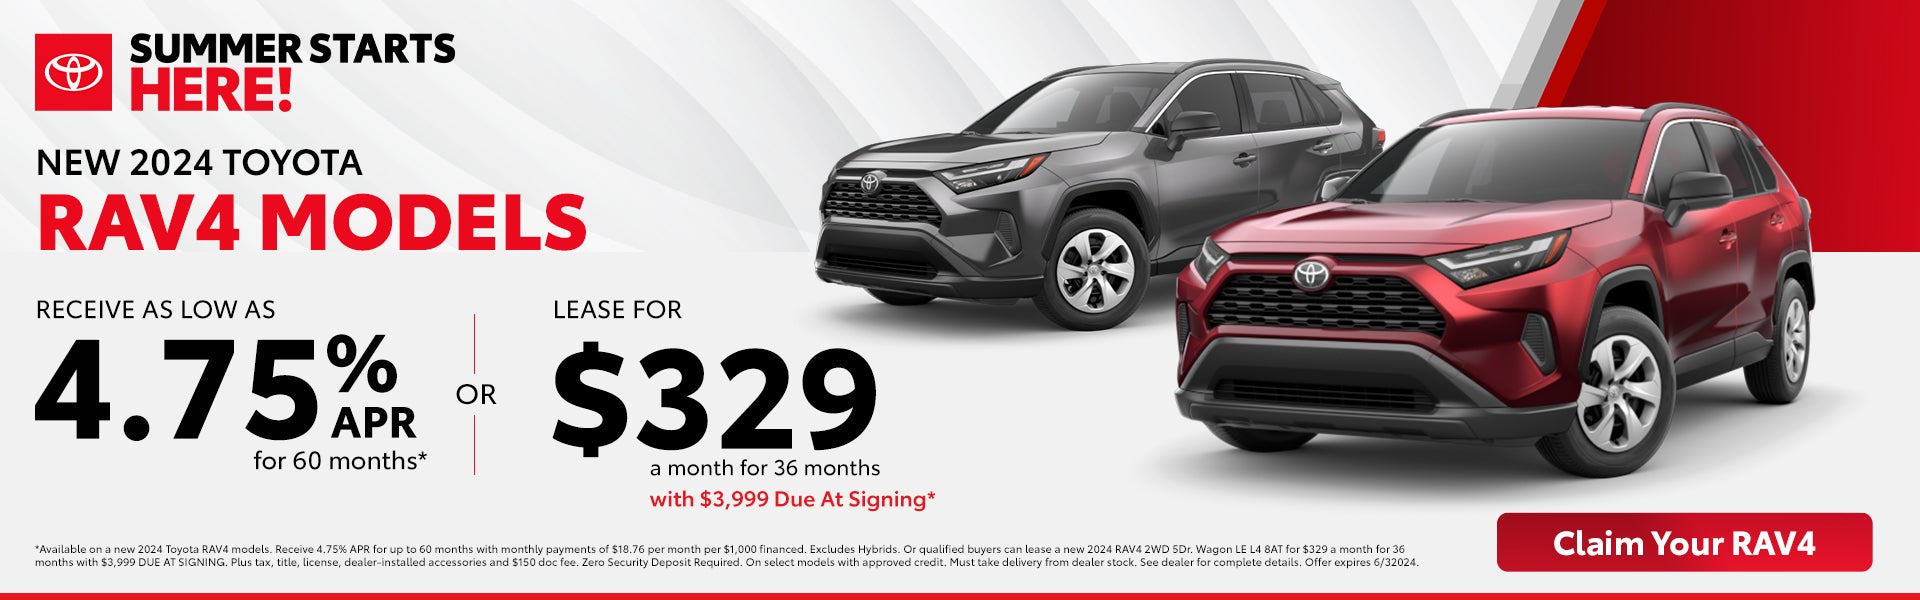 New 2024 Toyota RAV4 APR and Lease Offer Fort Worth TX